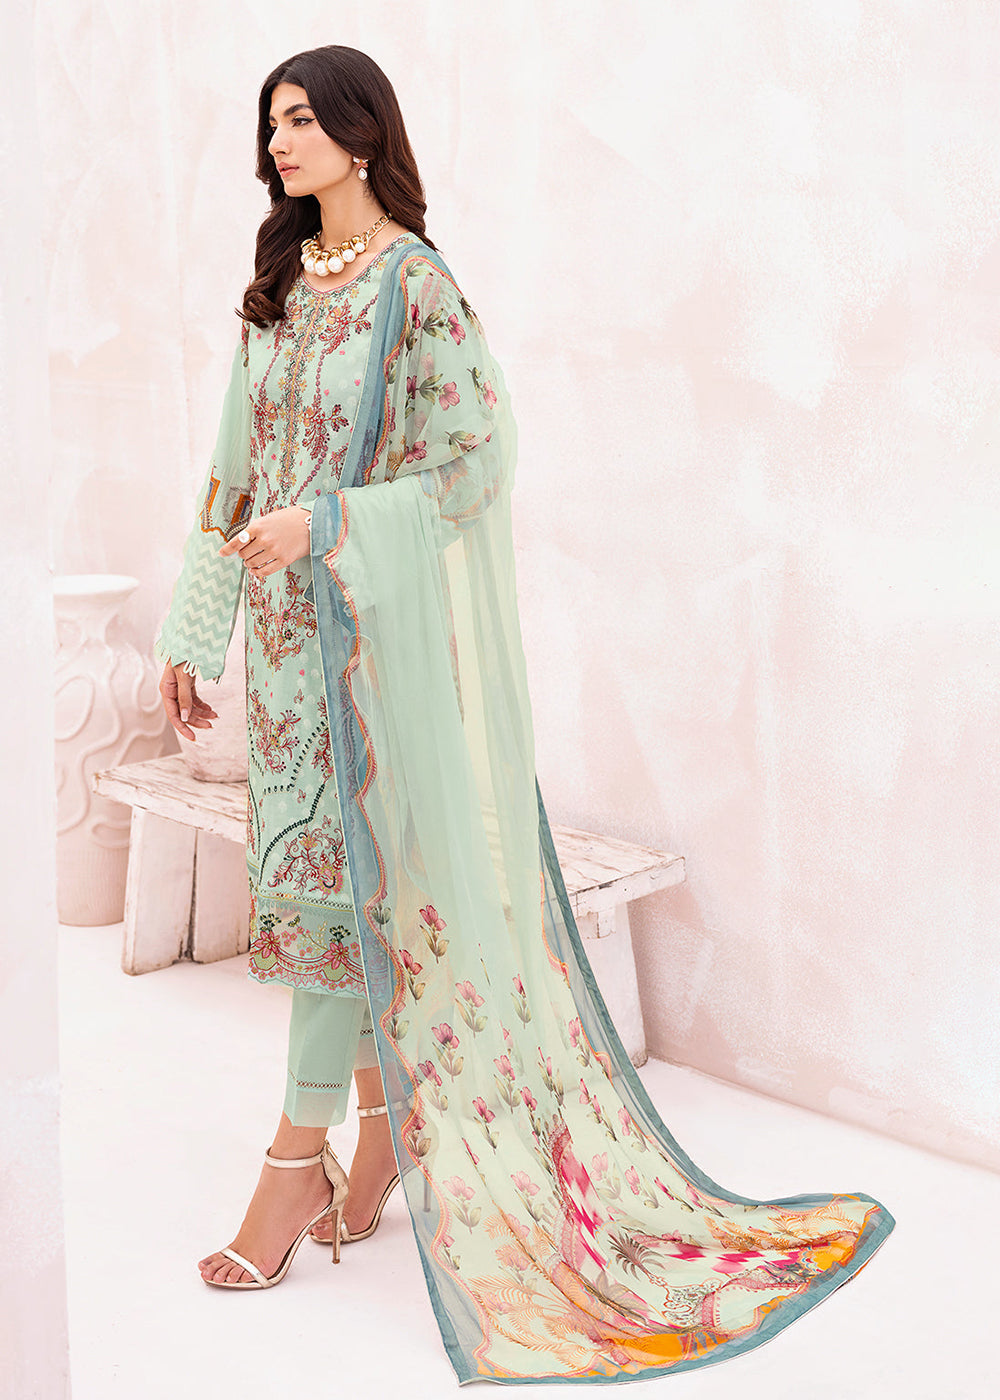 Buy Now Green Pakistani Salwar Suit - Ramsha Mashaal Collection Vol 7 - #L-708 Online in USA, UK, Canada & Worldwide at Empress Clothing.